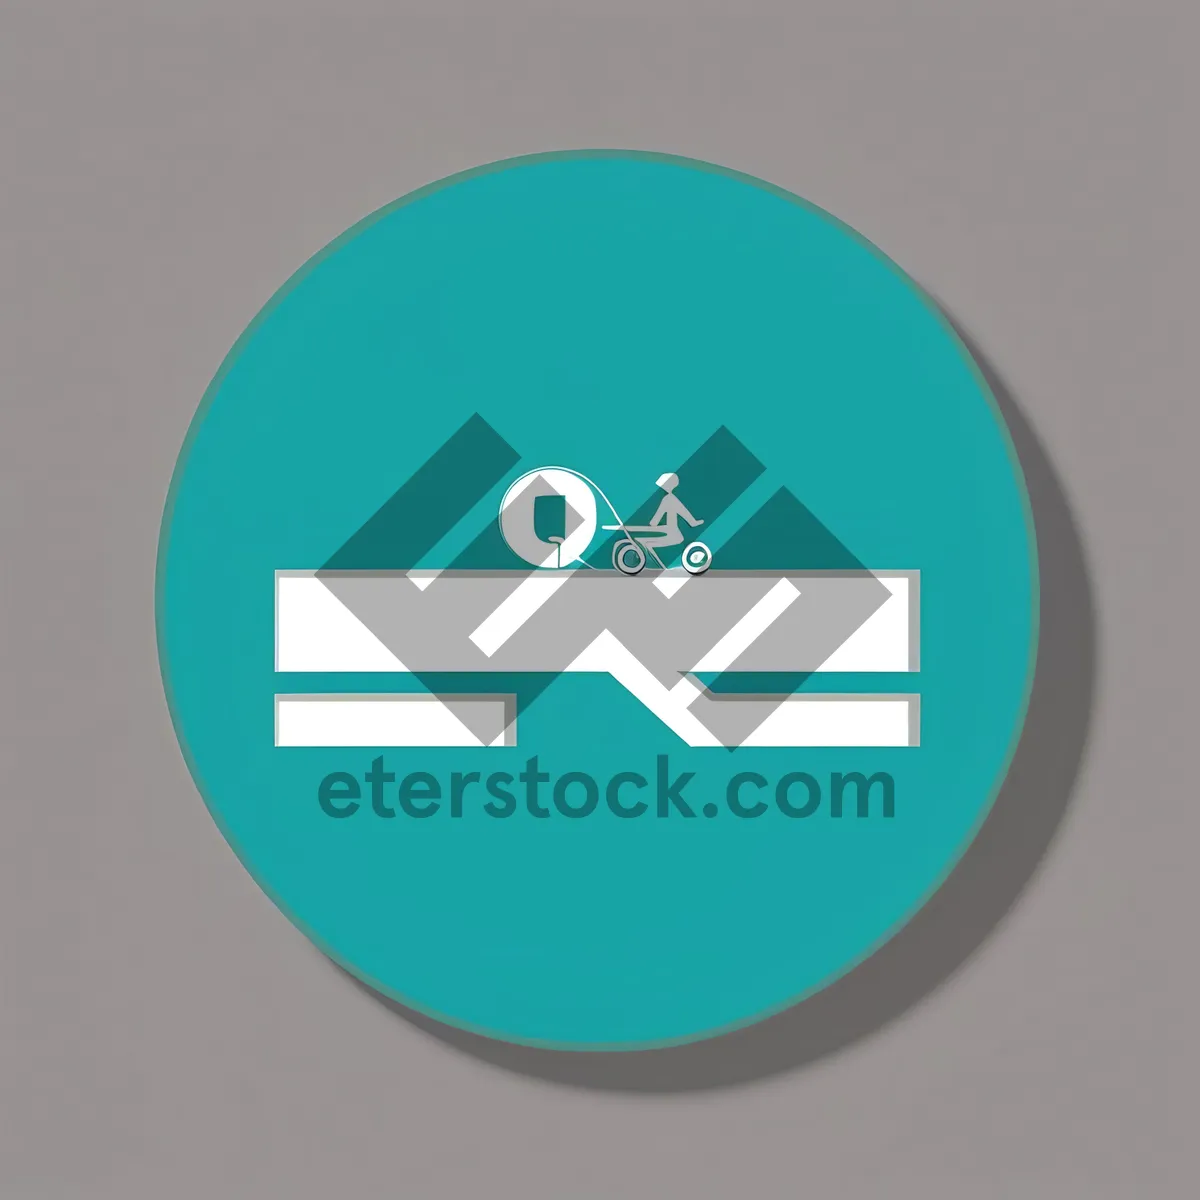 3D glossy round button icon